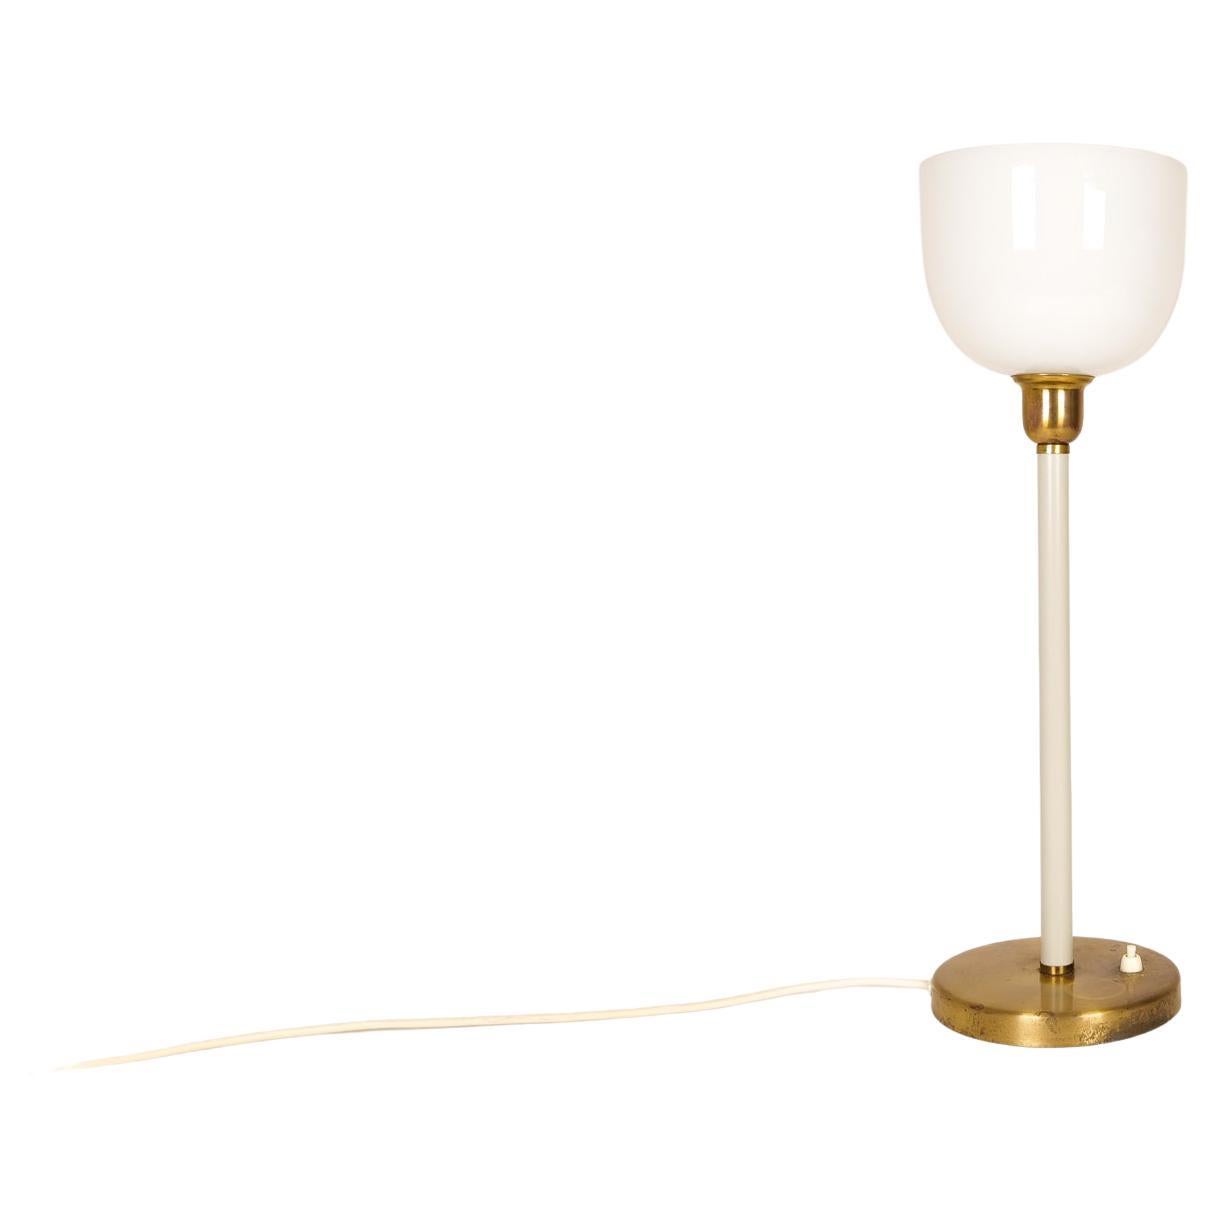 Genuinely nice Swedish table lamp made in the 1940s for ASEA and designed by Hans Bergström. With a brass base and a hard plastic rod leading up to an opaline glass. 

Good vintage condition with some wear consistent with age and use, base with